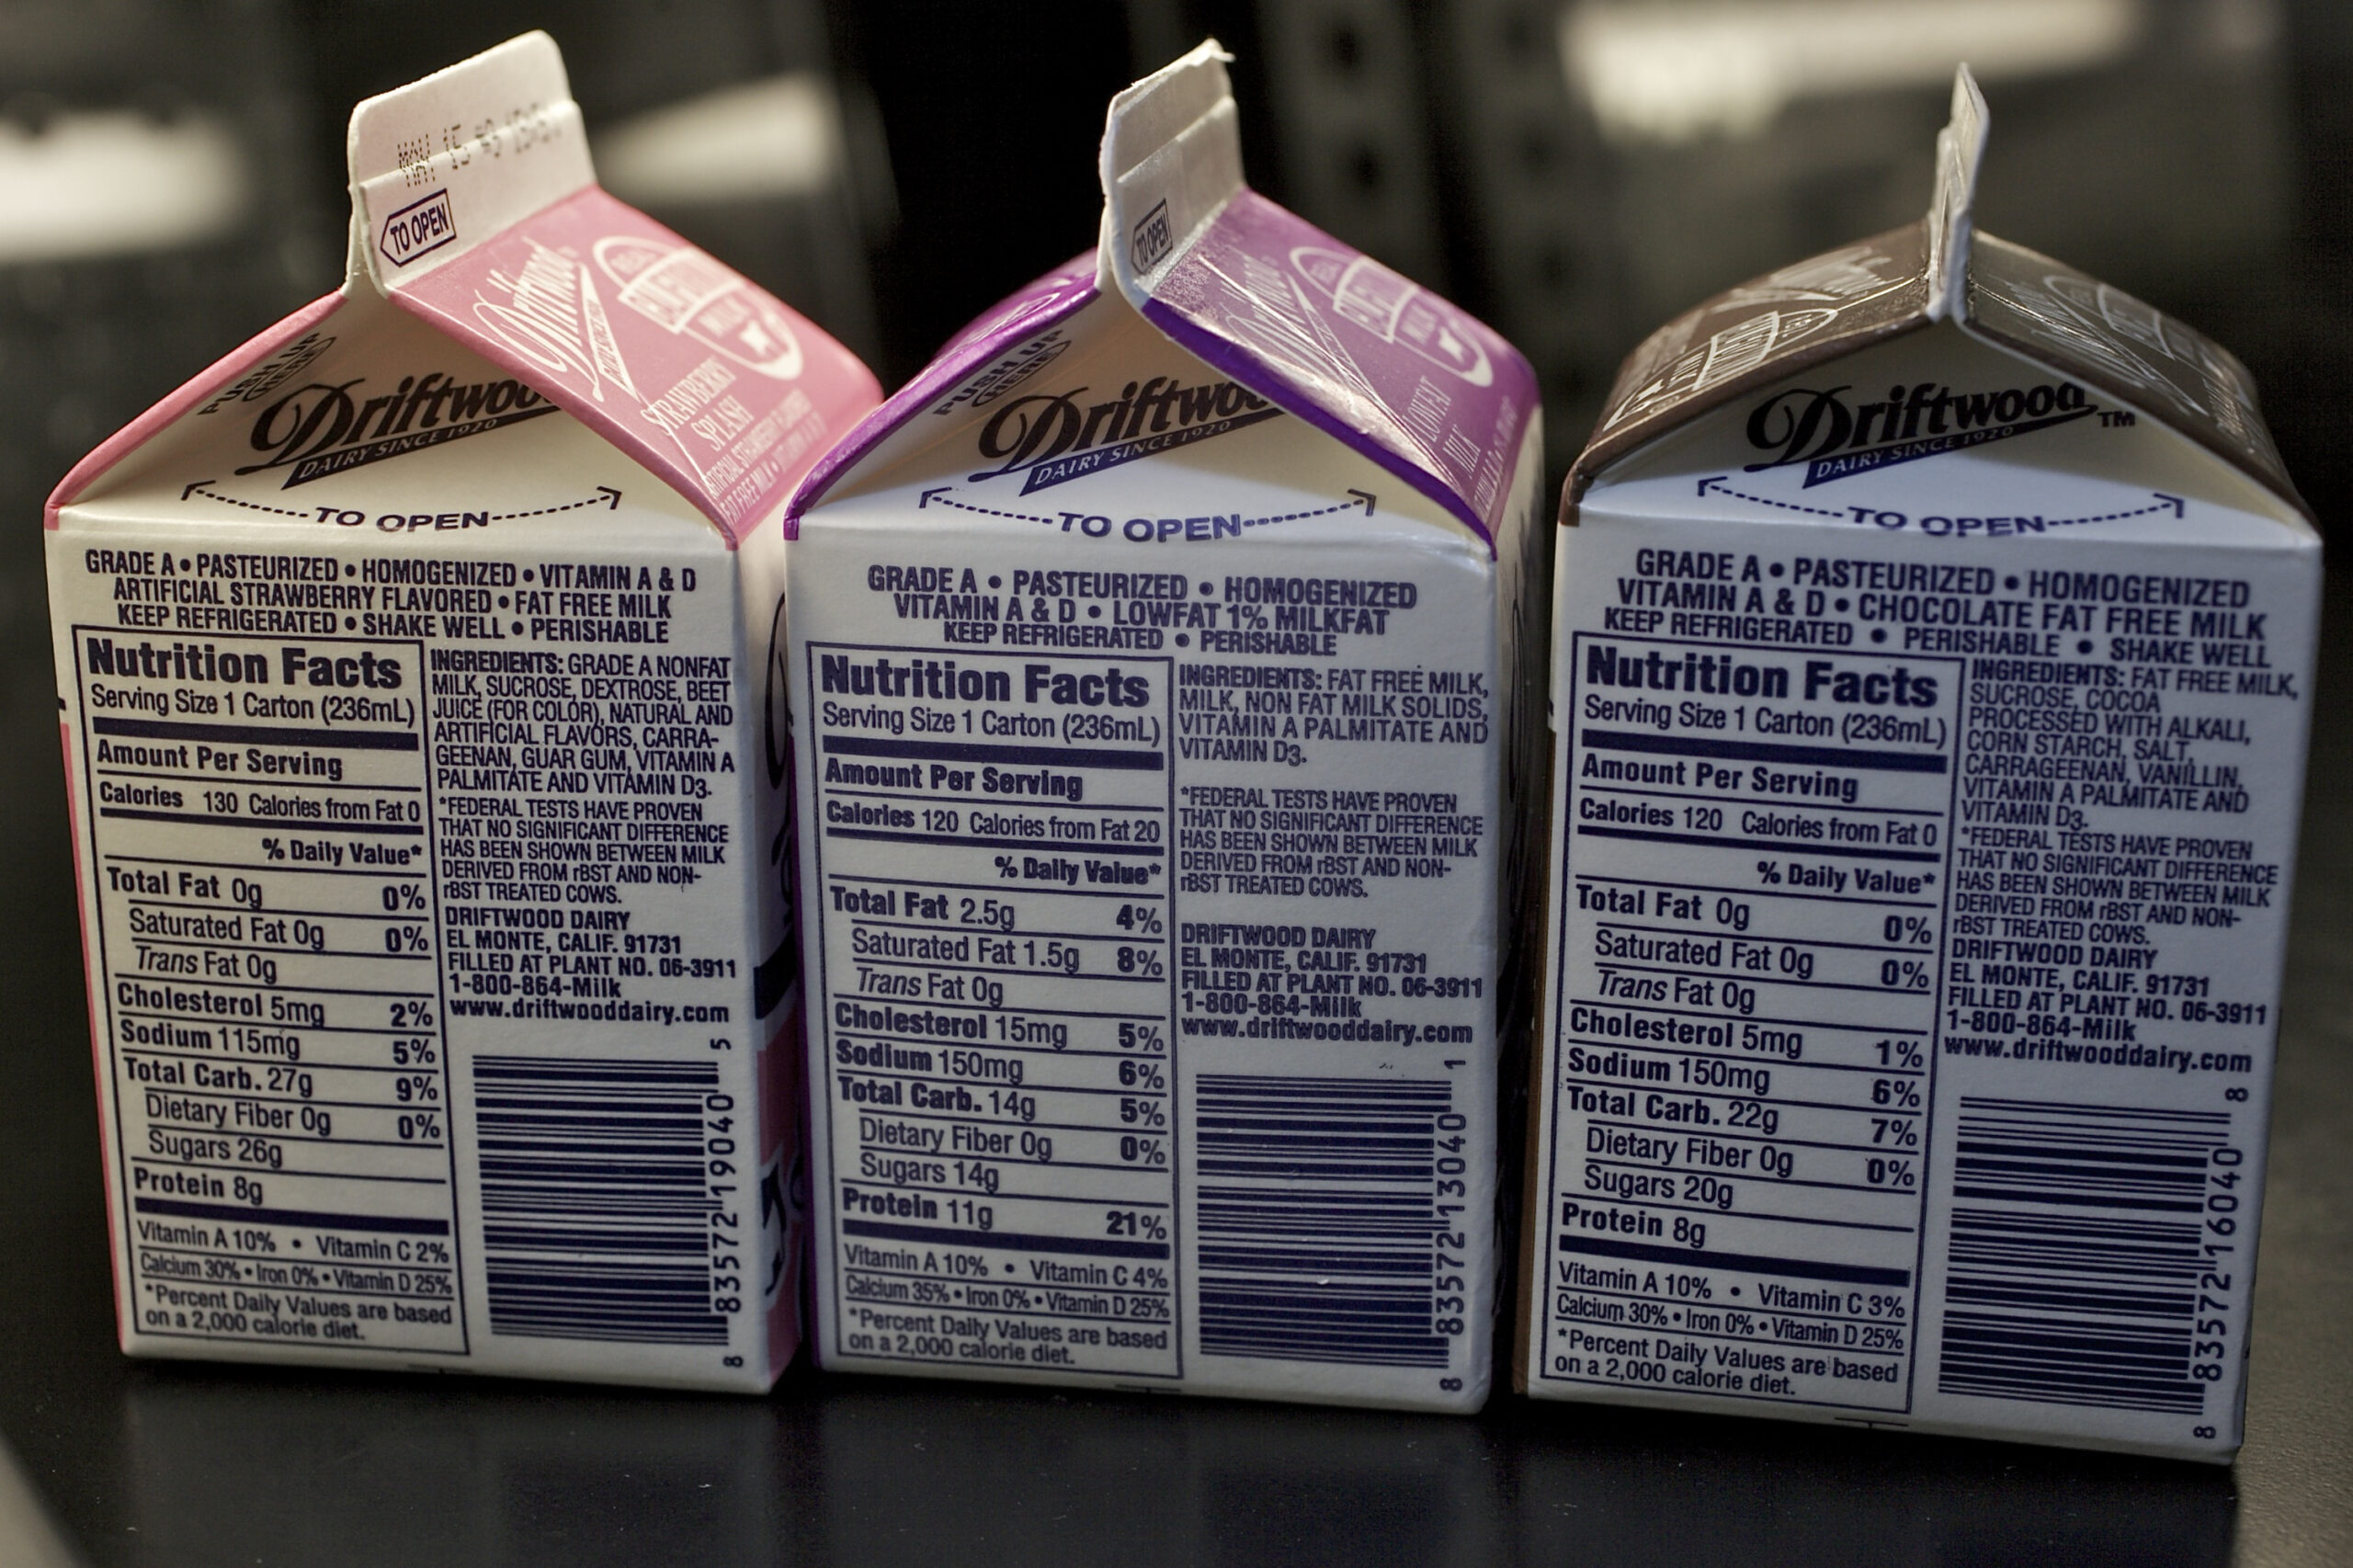 Wisconsin Experts Weigh In On Federal Proposal To Allow More Flavored Milk In School Lunches